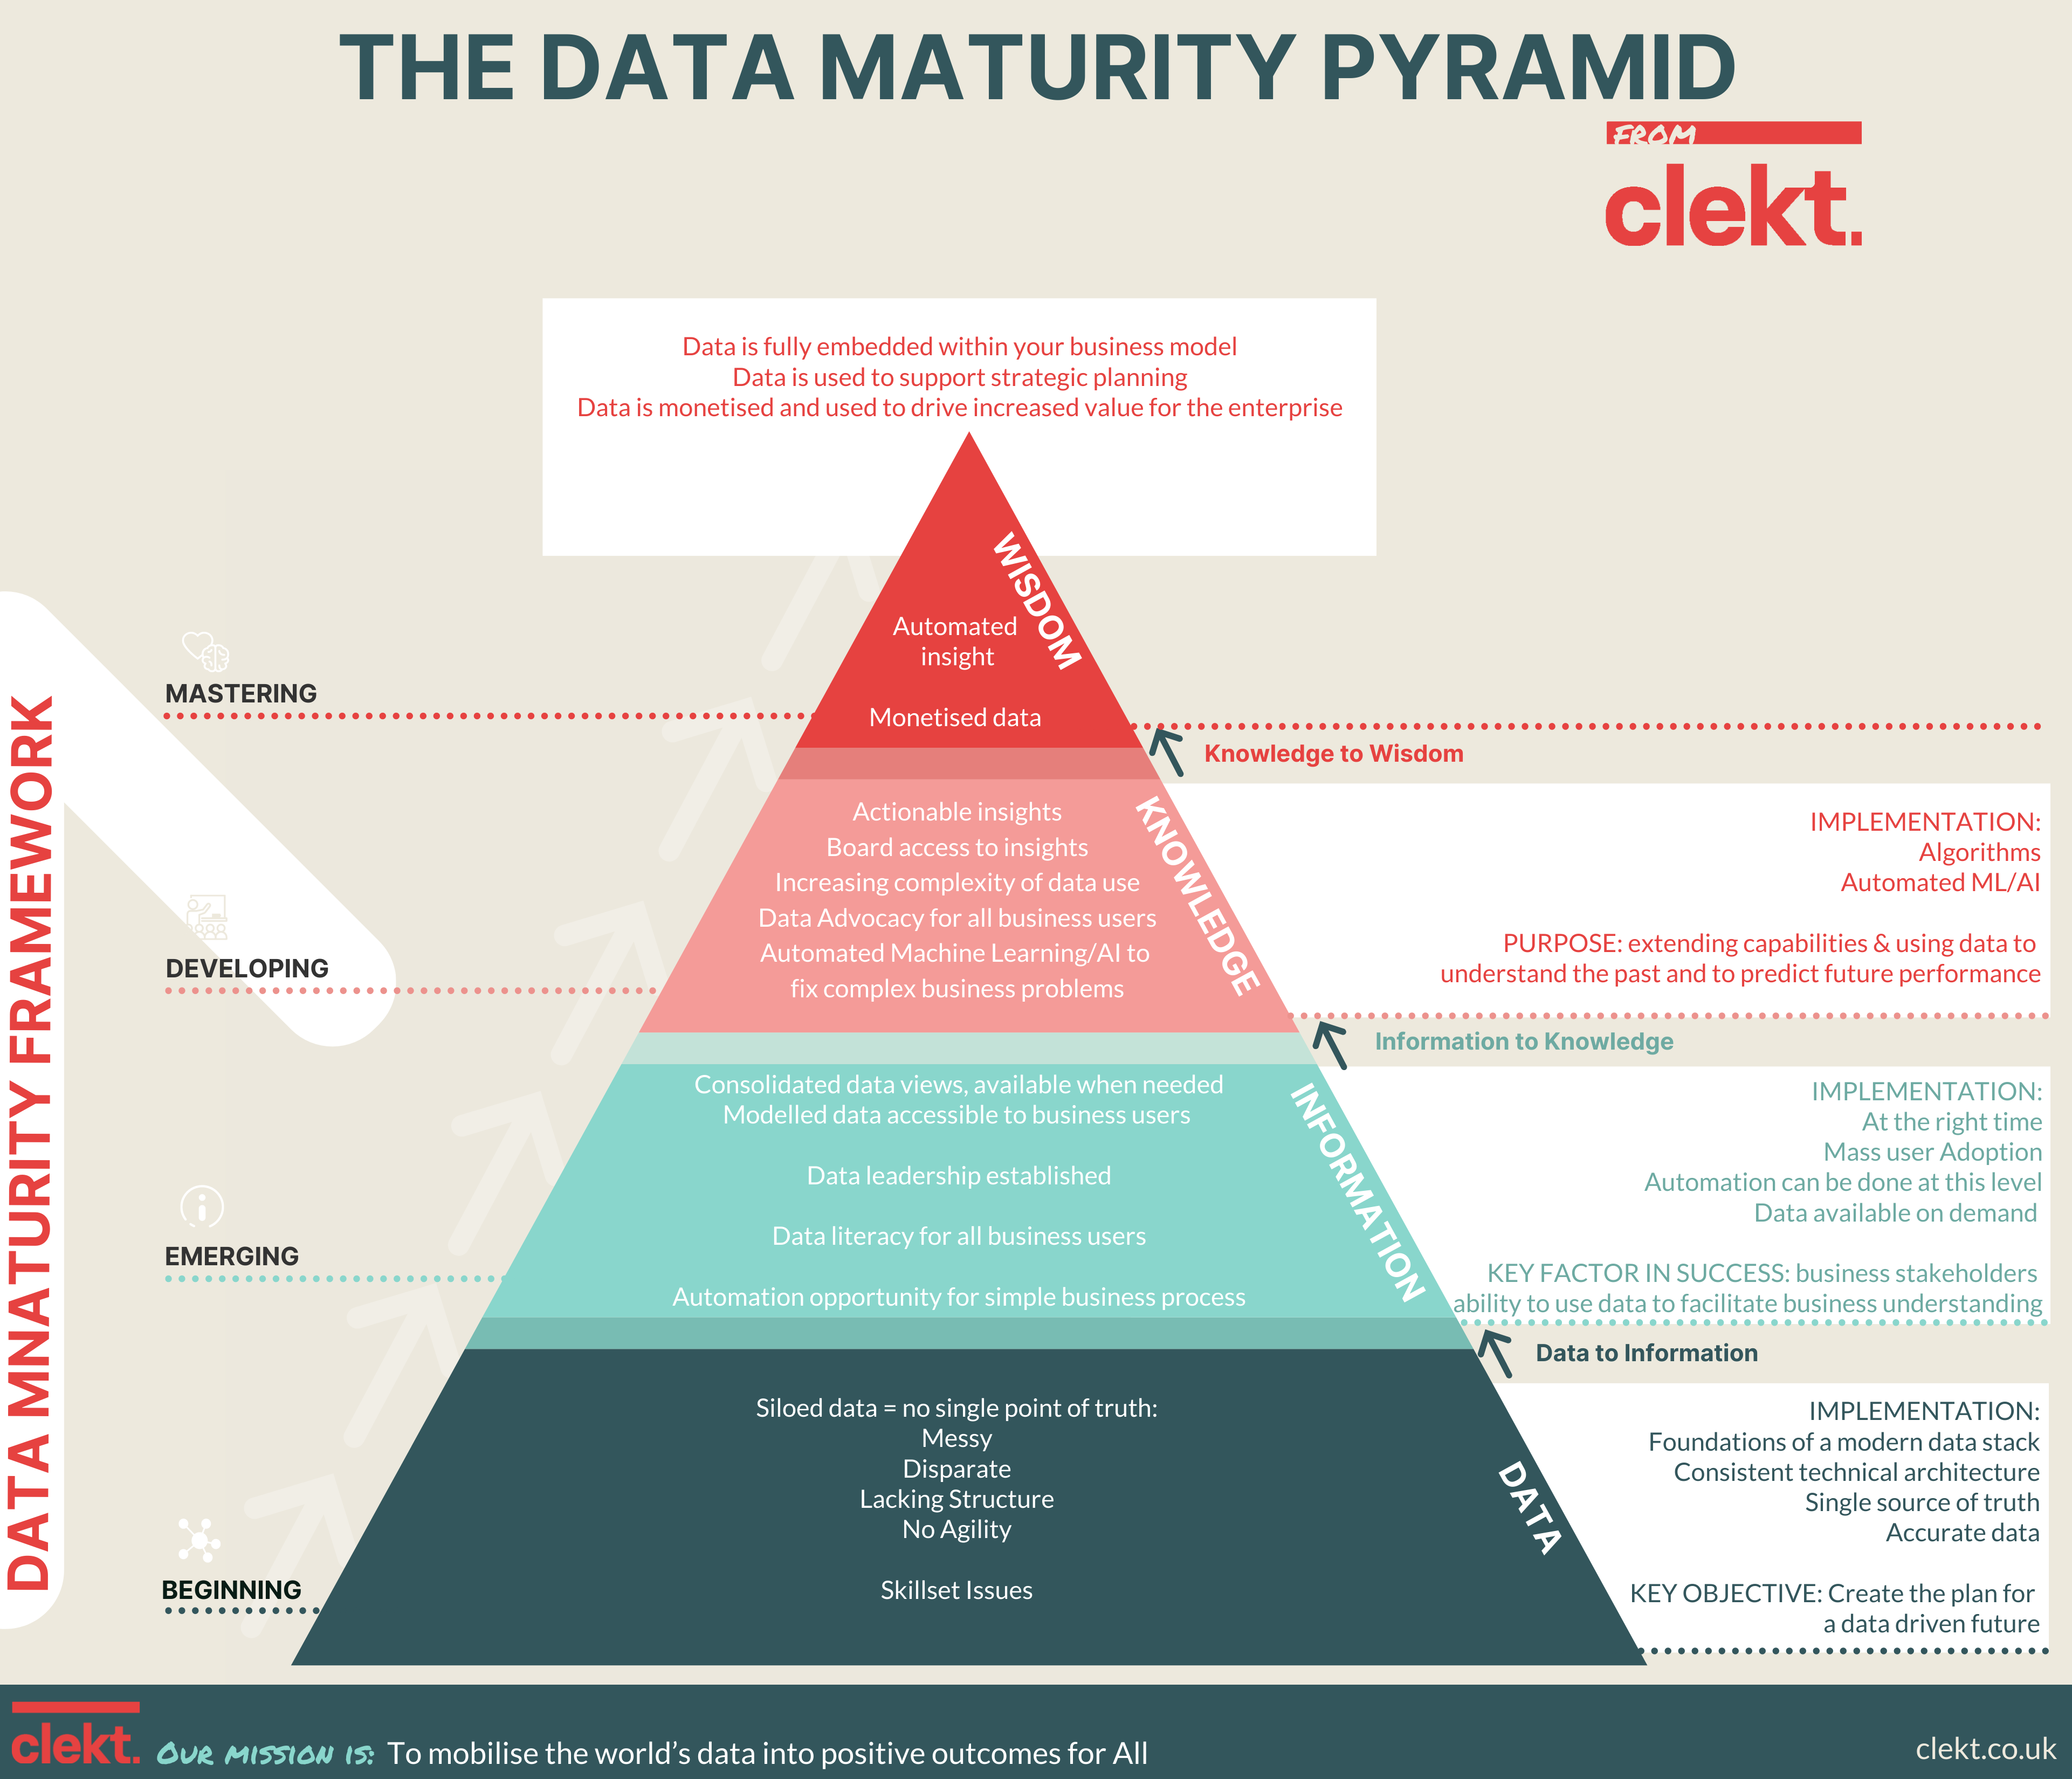 Data Maturity Pyramid is a simple yet effective visual guide as to what organisations can expect to go through as they mature their data capability